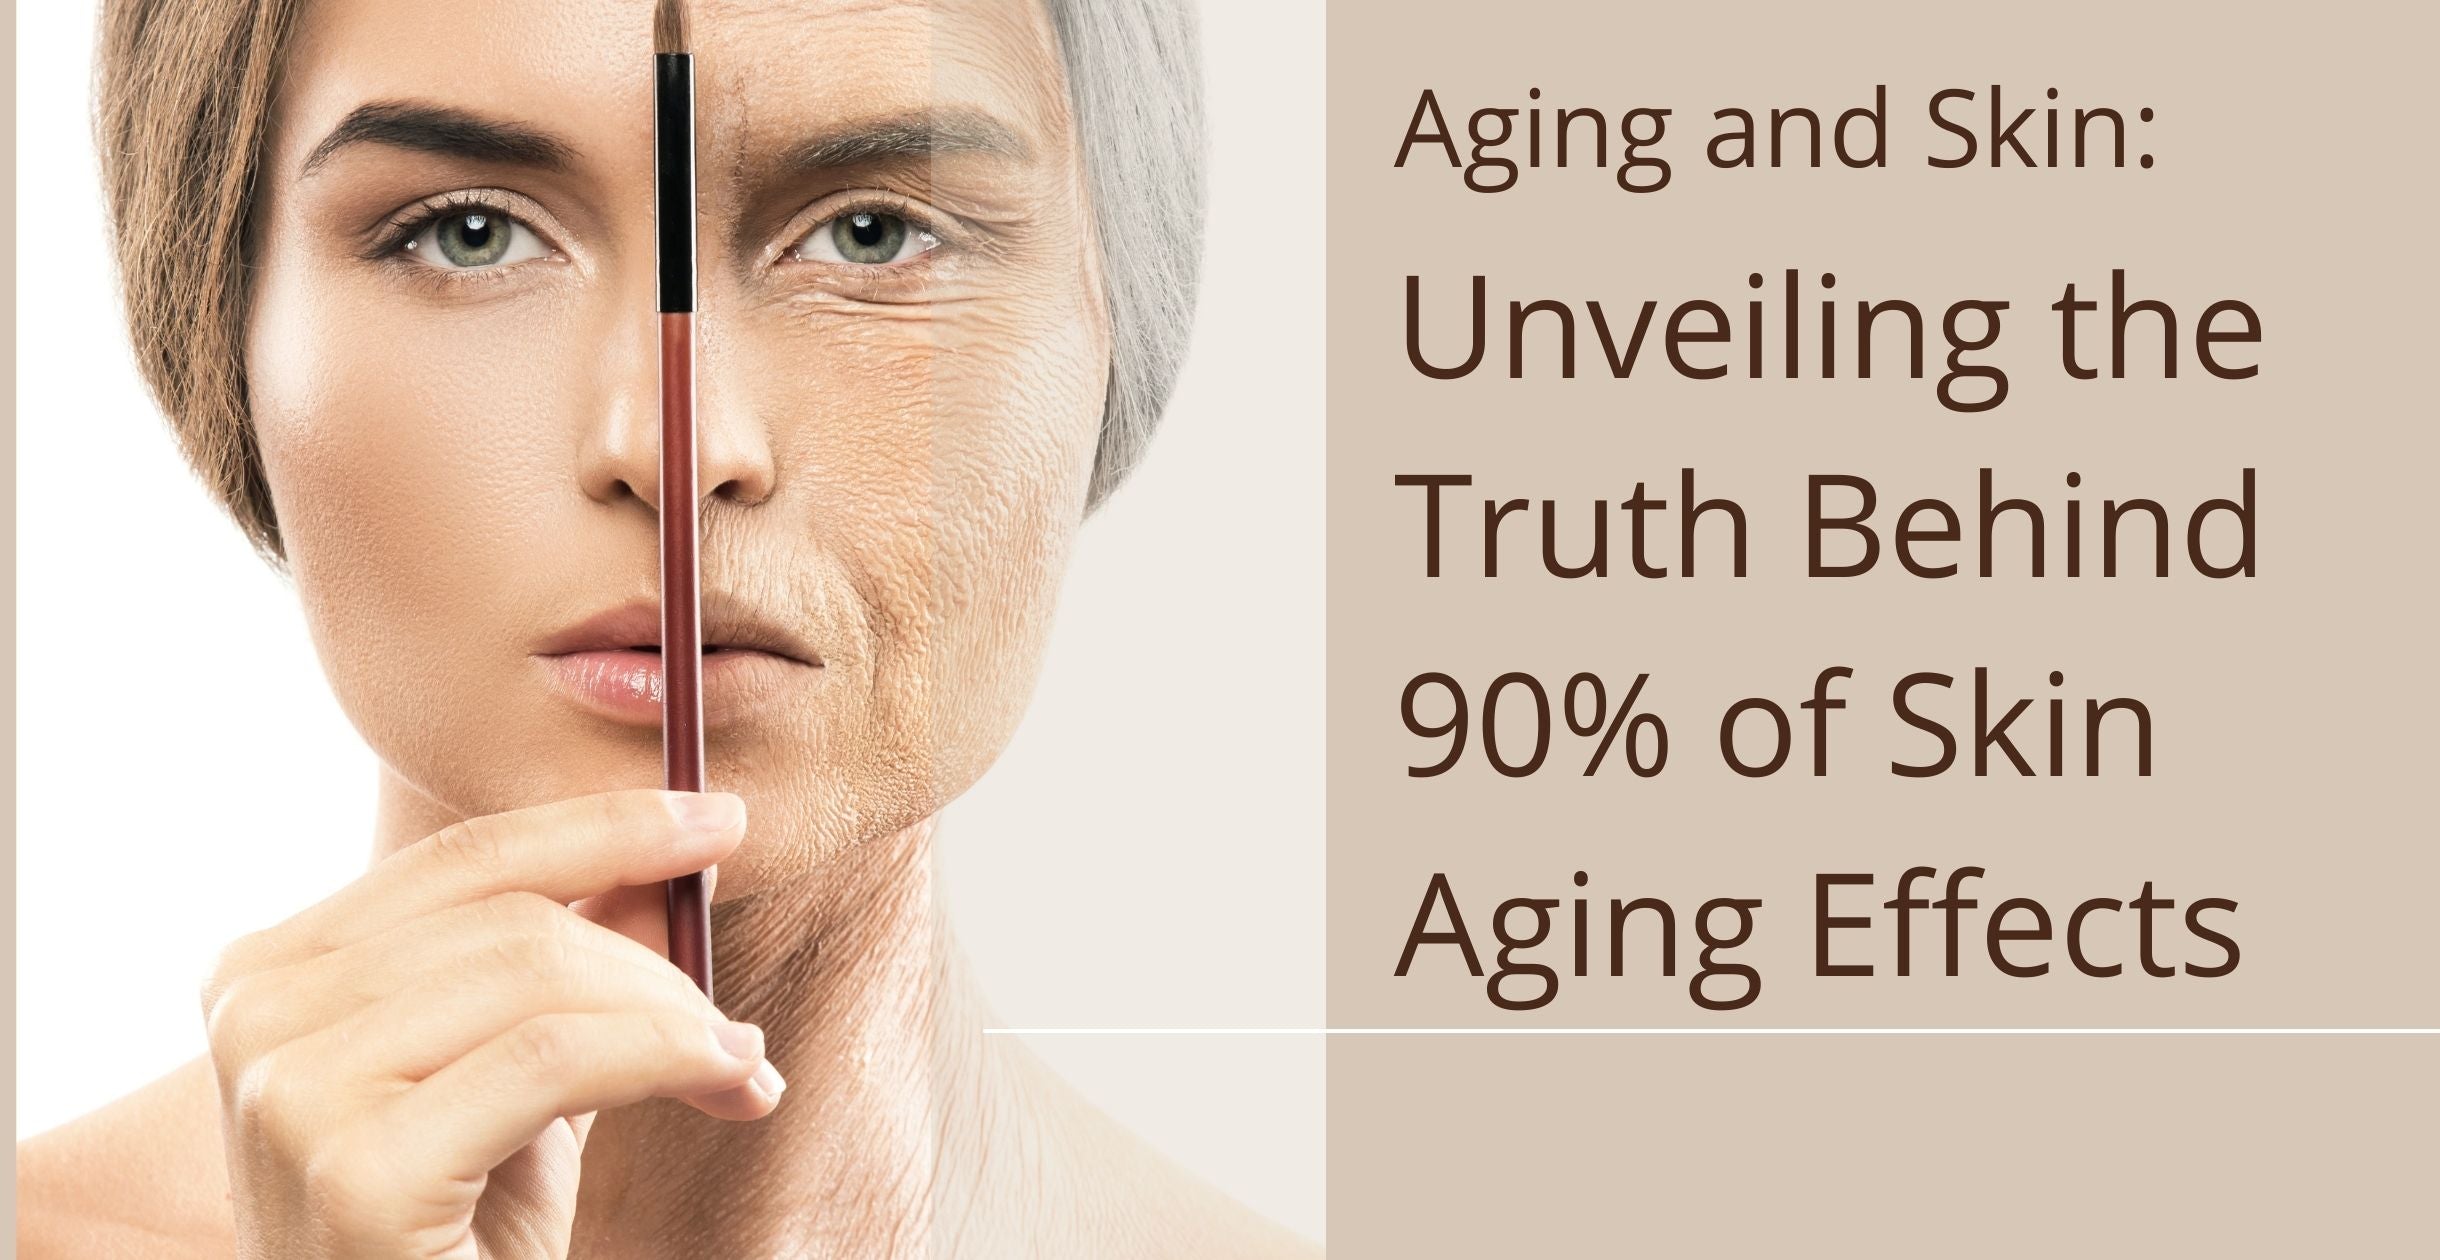 Aging and Skin: Unveiling the Truth Behind 90% of Skin Aging Effects